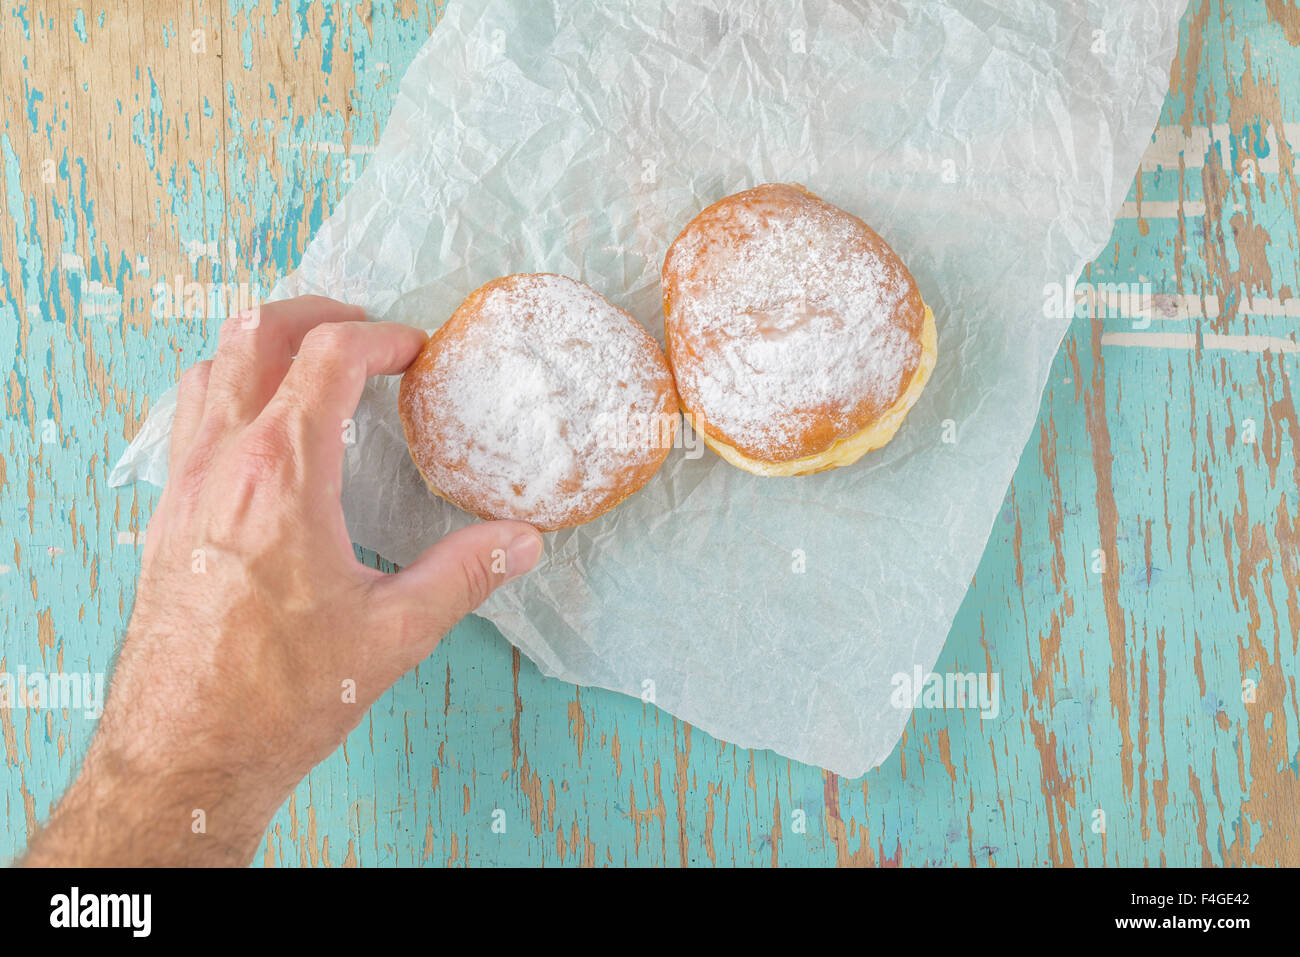 Male hand reaches and picking sweet sugary donut from rustic wooden kitchen table, classic hannukah sufganiyot or tasty bakery d Stock Photo